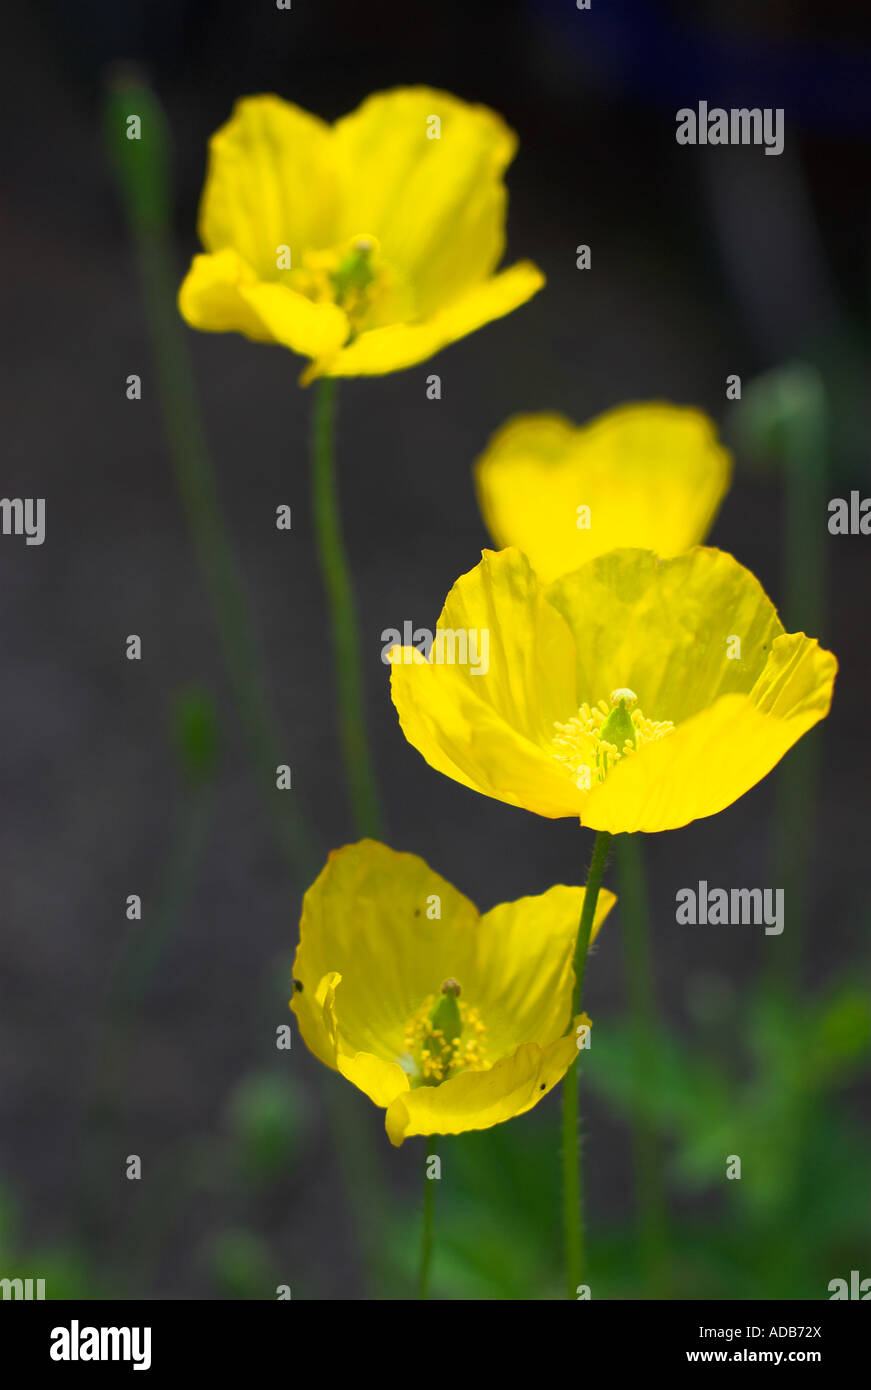 Welsh poppies. Stock Photo